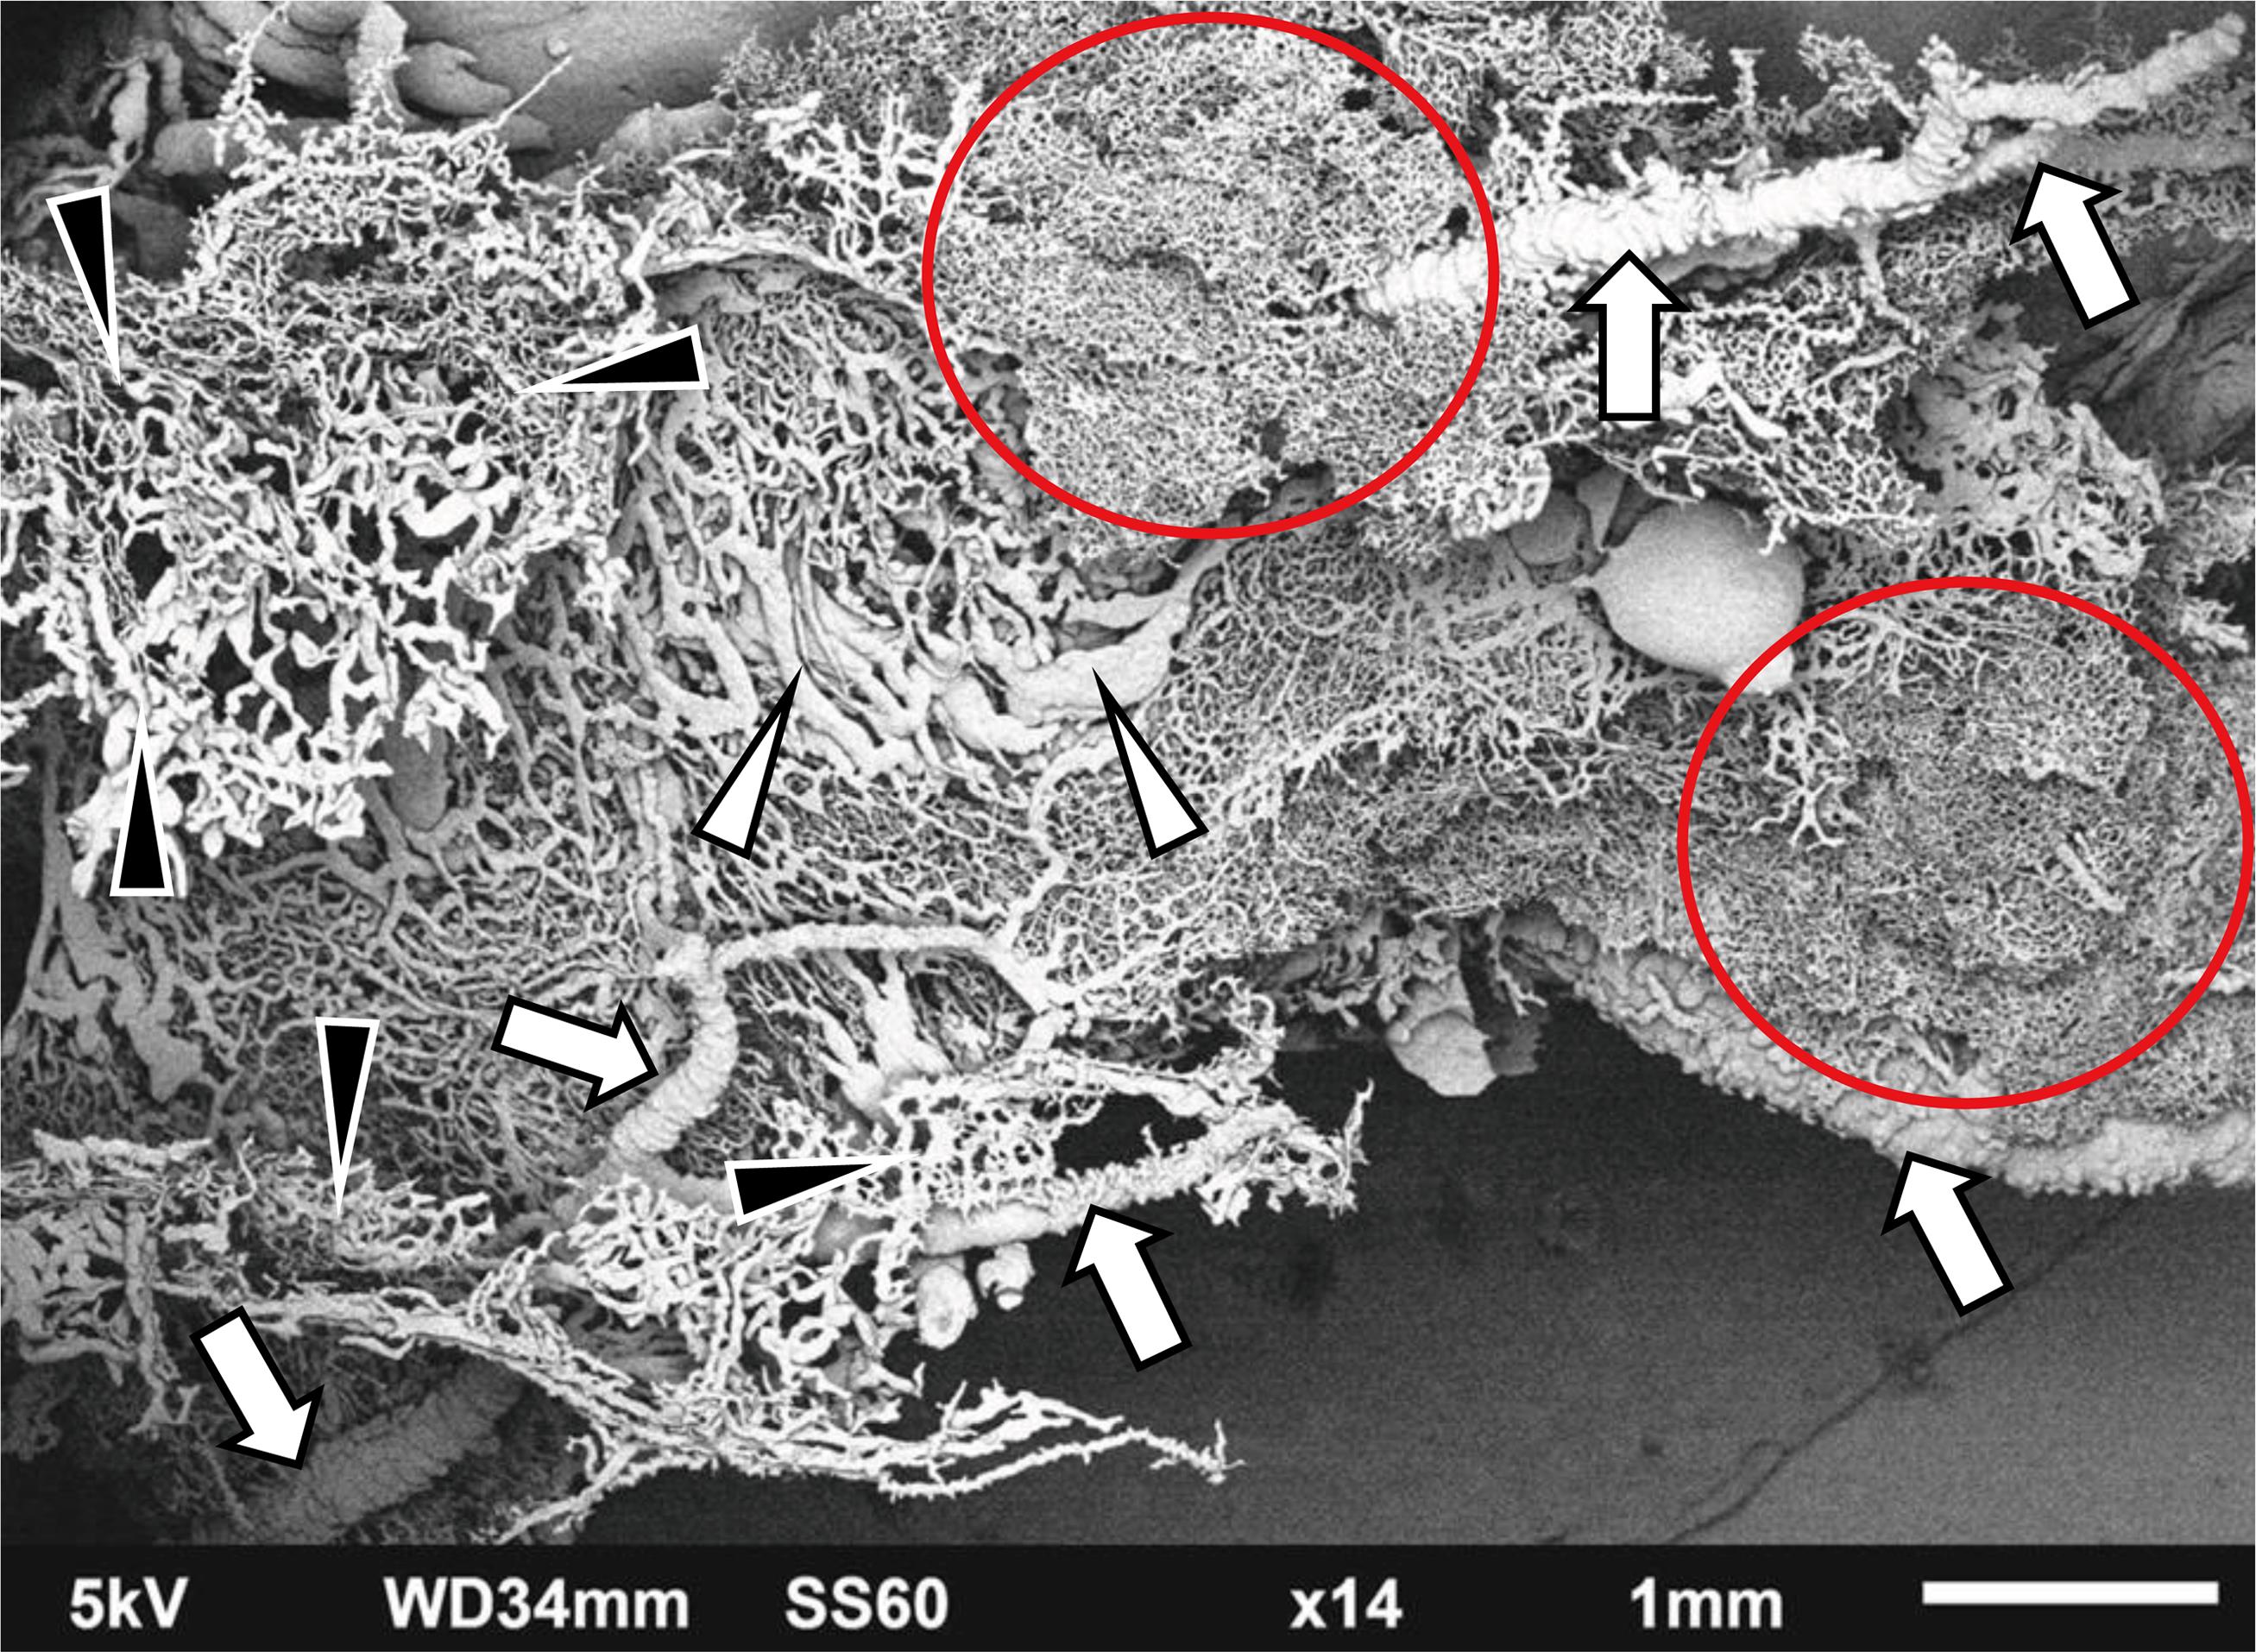 Scanning electron microscopy of corrosion casts of the biliary pathway of rats at 2 weeks after CBDO.